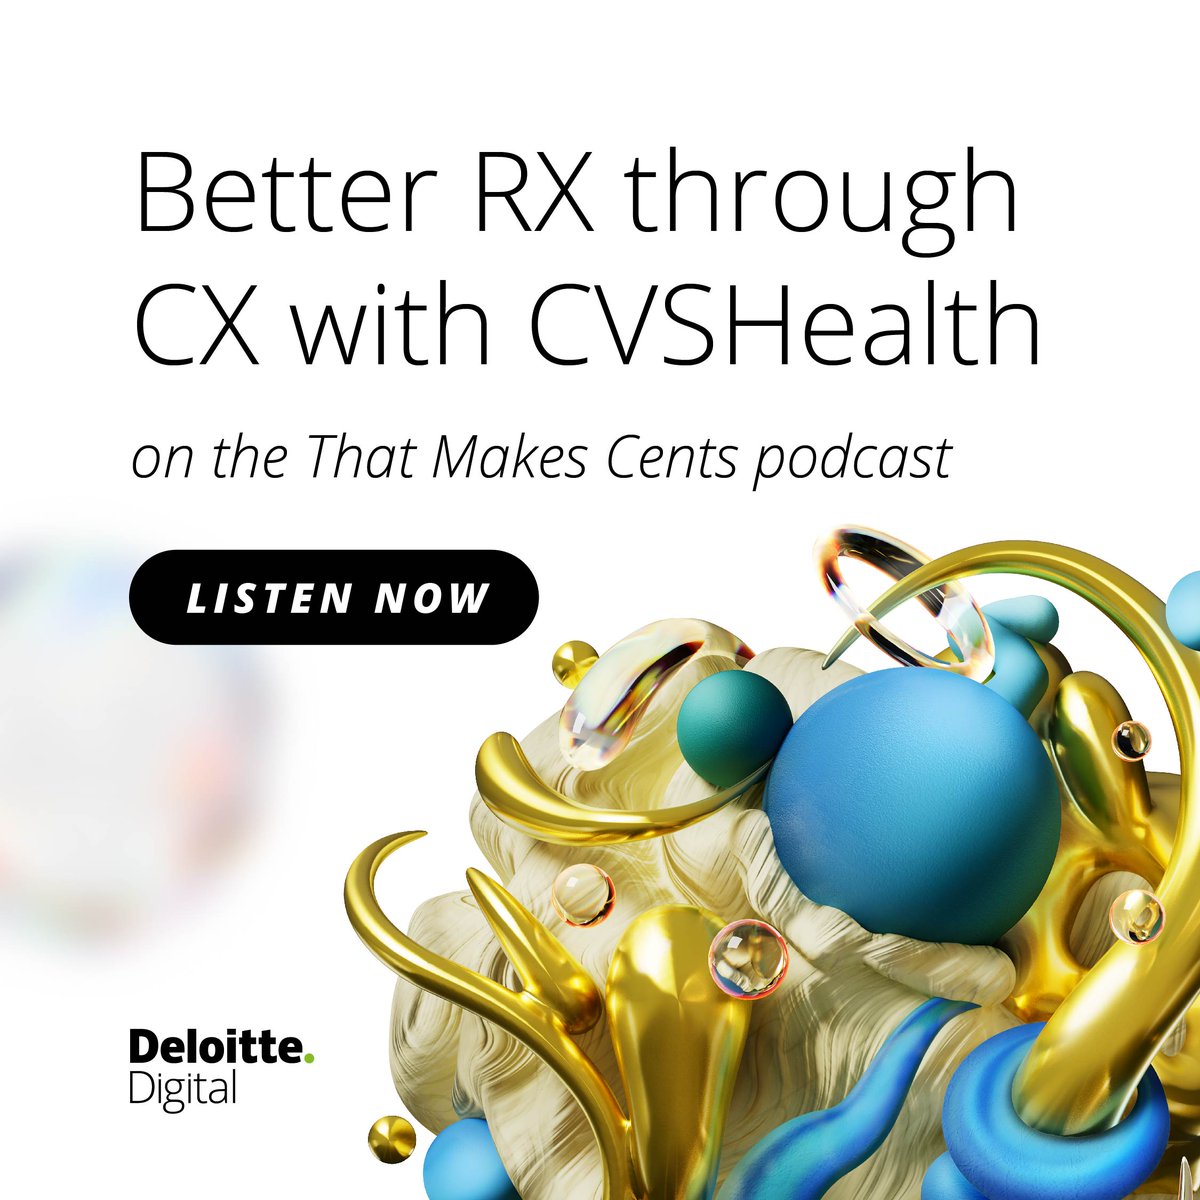 How can data transform the customer experience? Check out our latest episode of 'That Makes Cents' to learn how data insights and trends can enhance your #CustomerExperience. web.deloitte/6011wNfVN